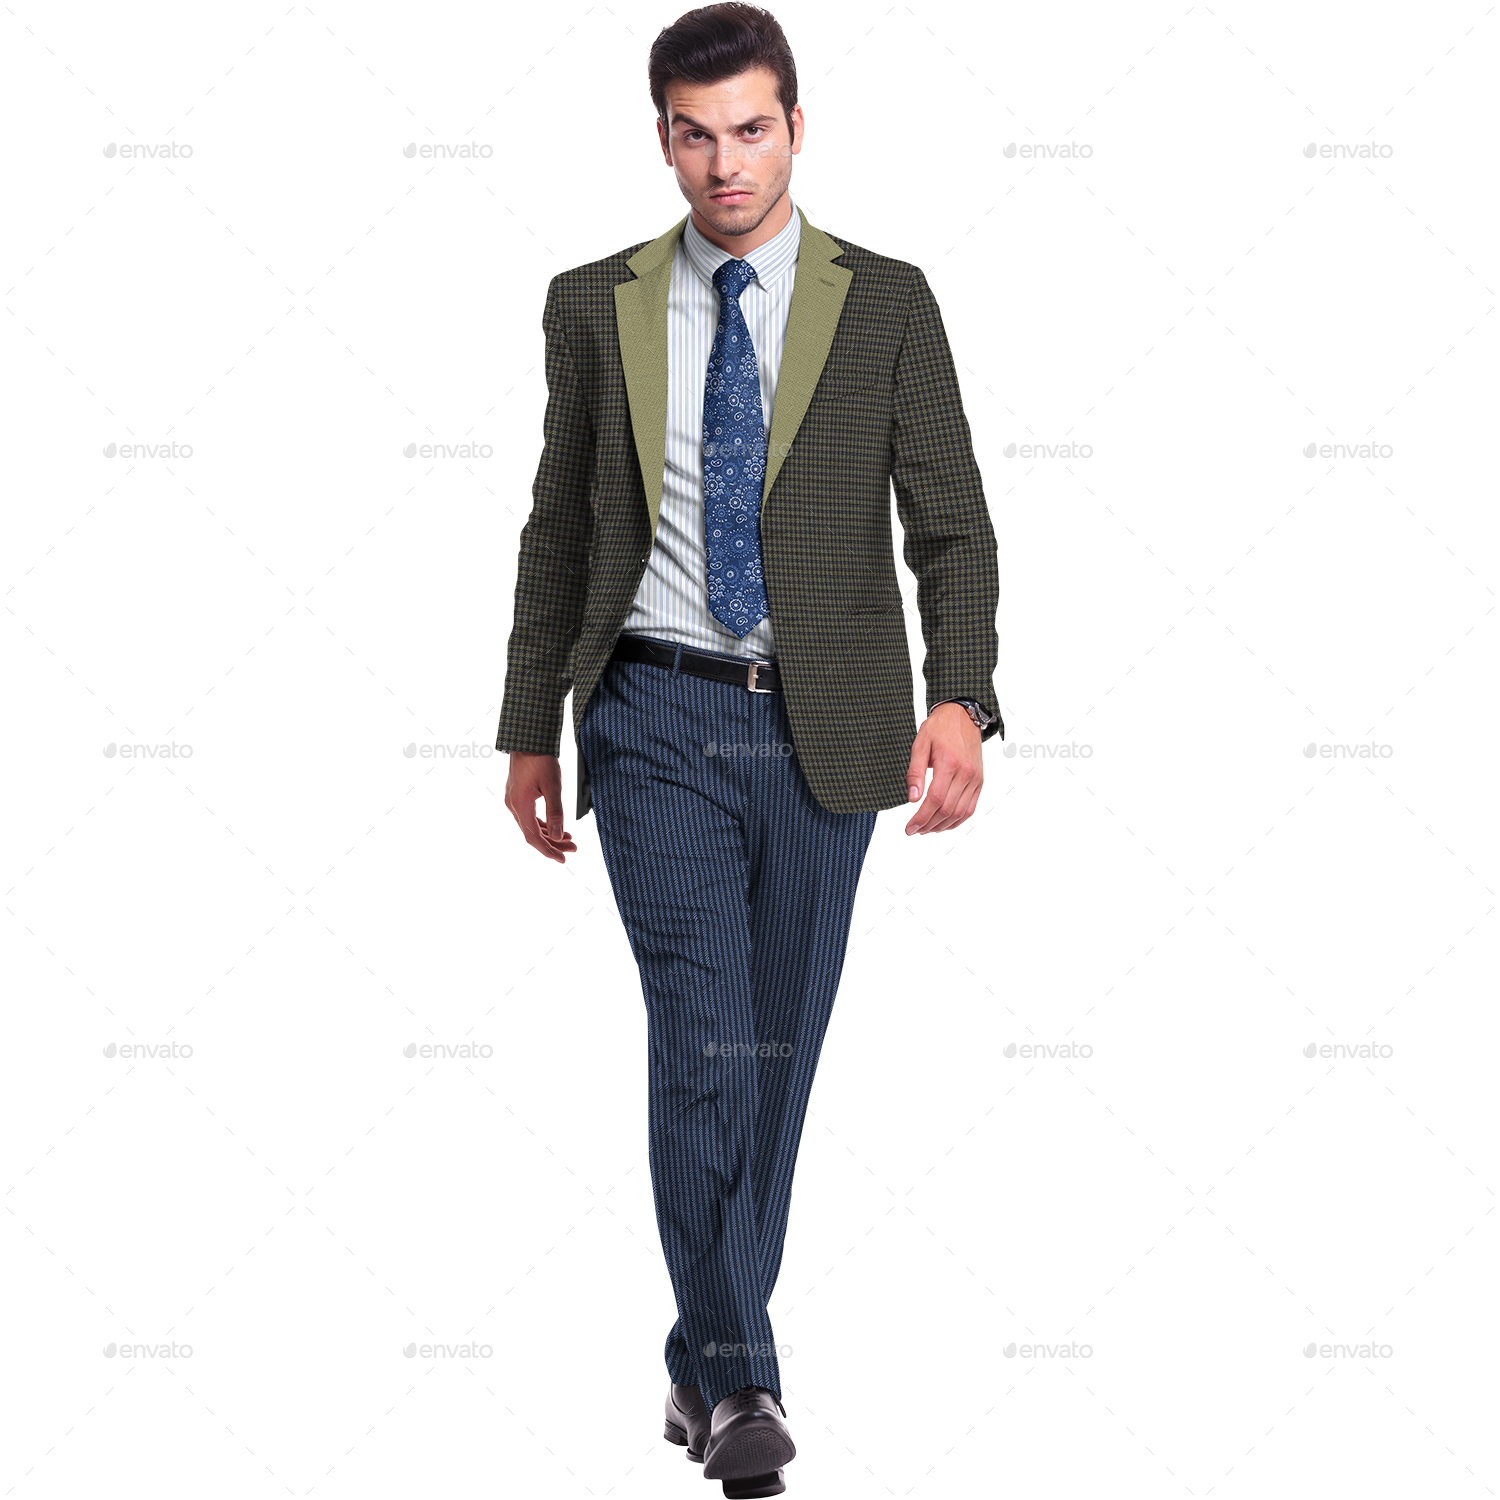 Suit Mock-up by Tojographics | GraphicRiver